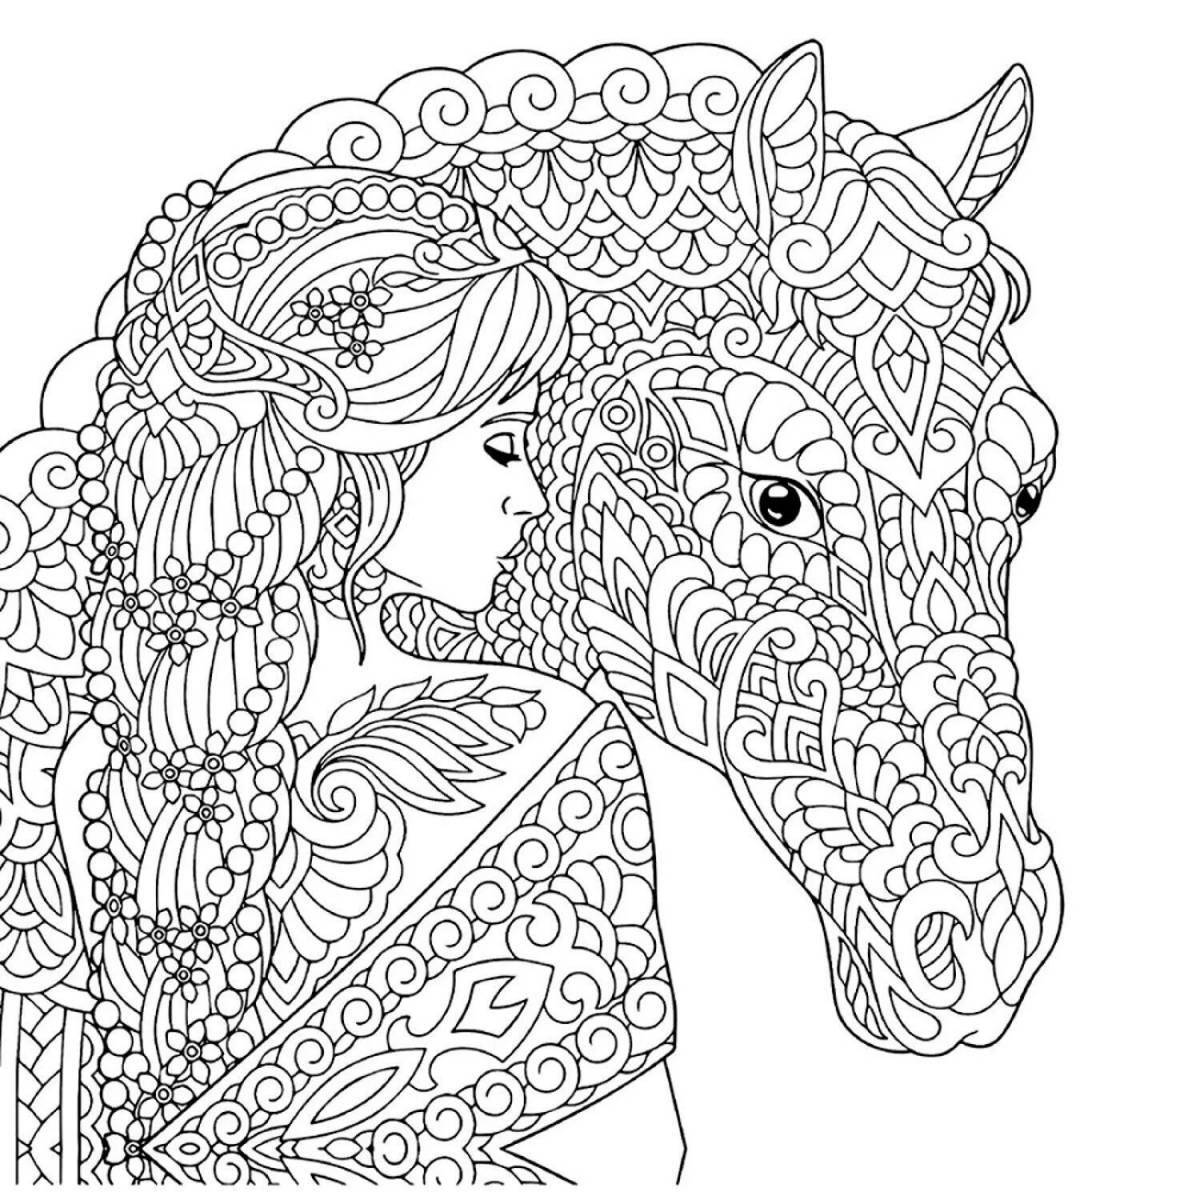 Elegant coloring book for girls 12 years old animal complex